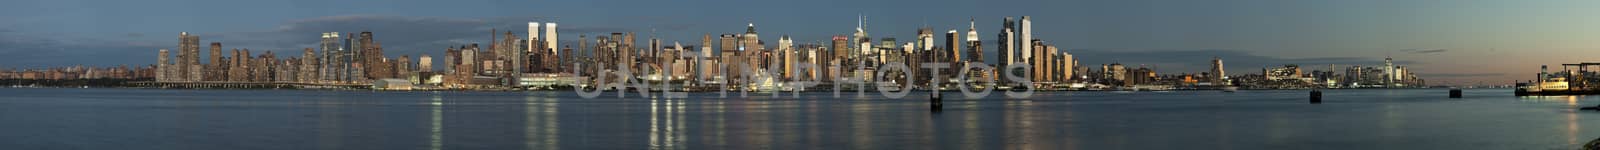 New York City, USA - Panorama from Uptown to Downtown by hanusst